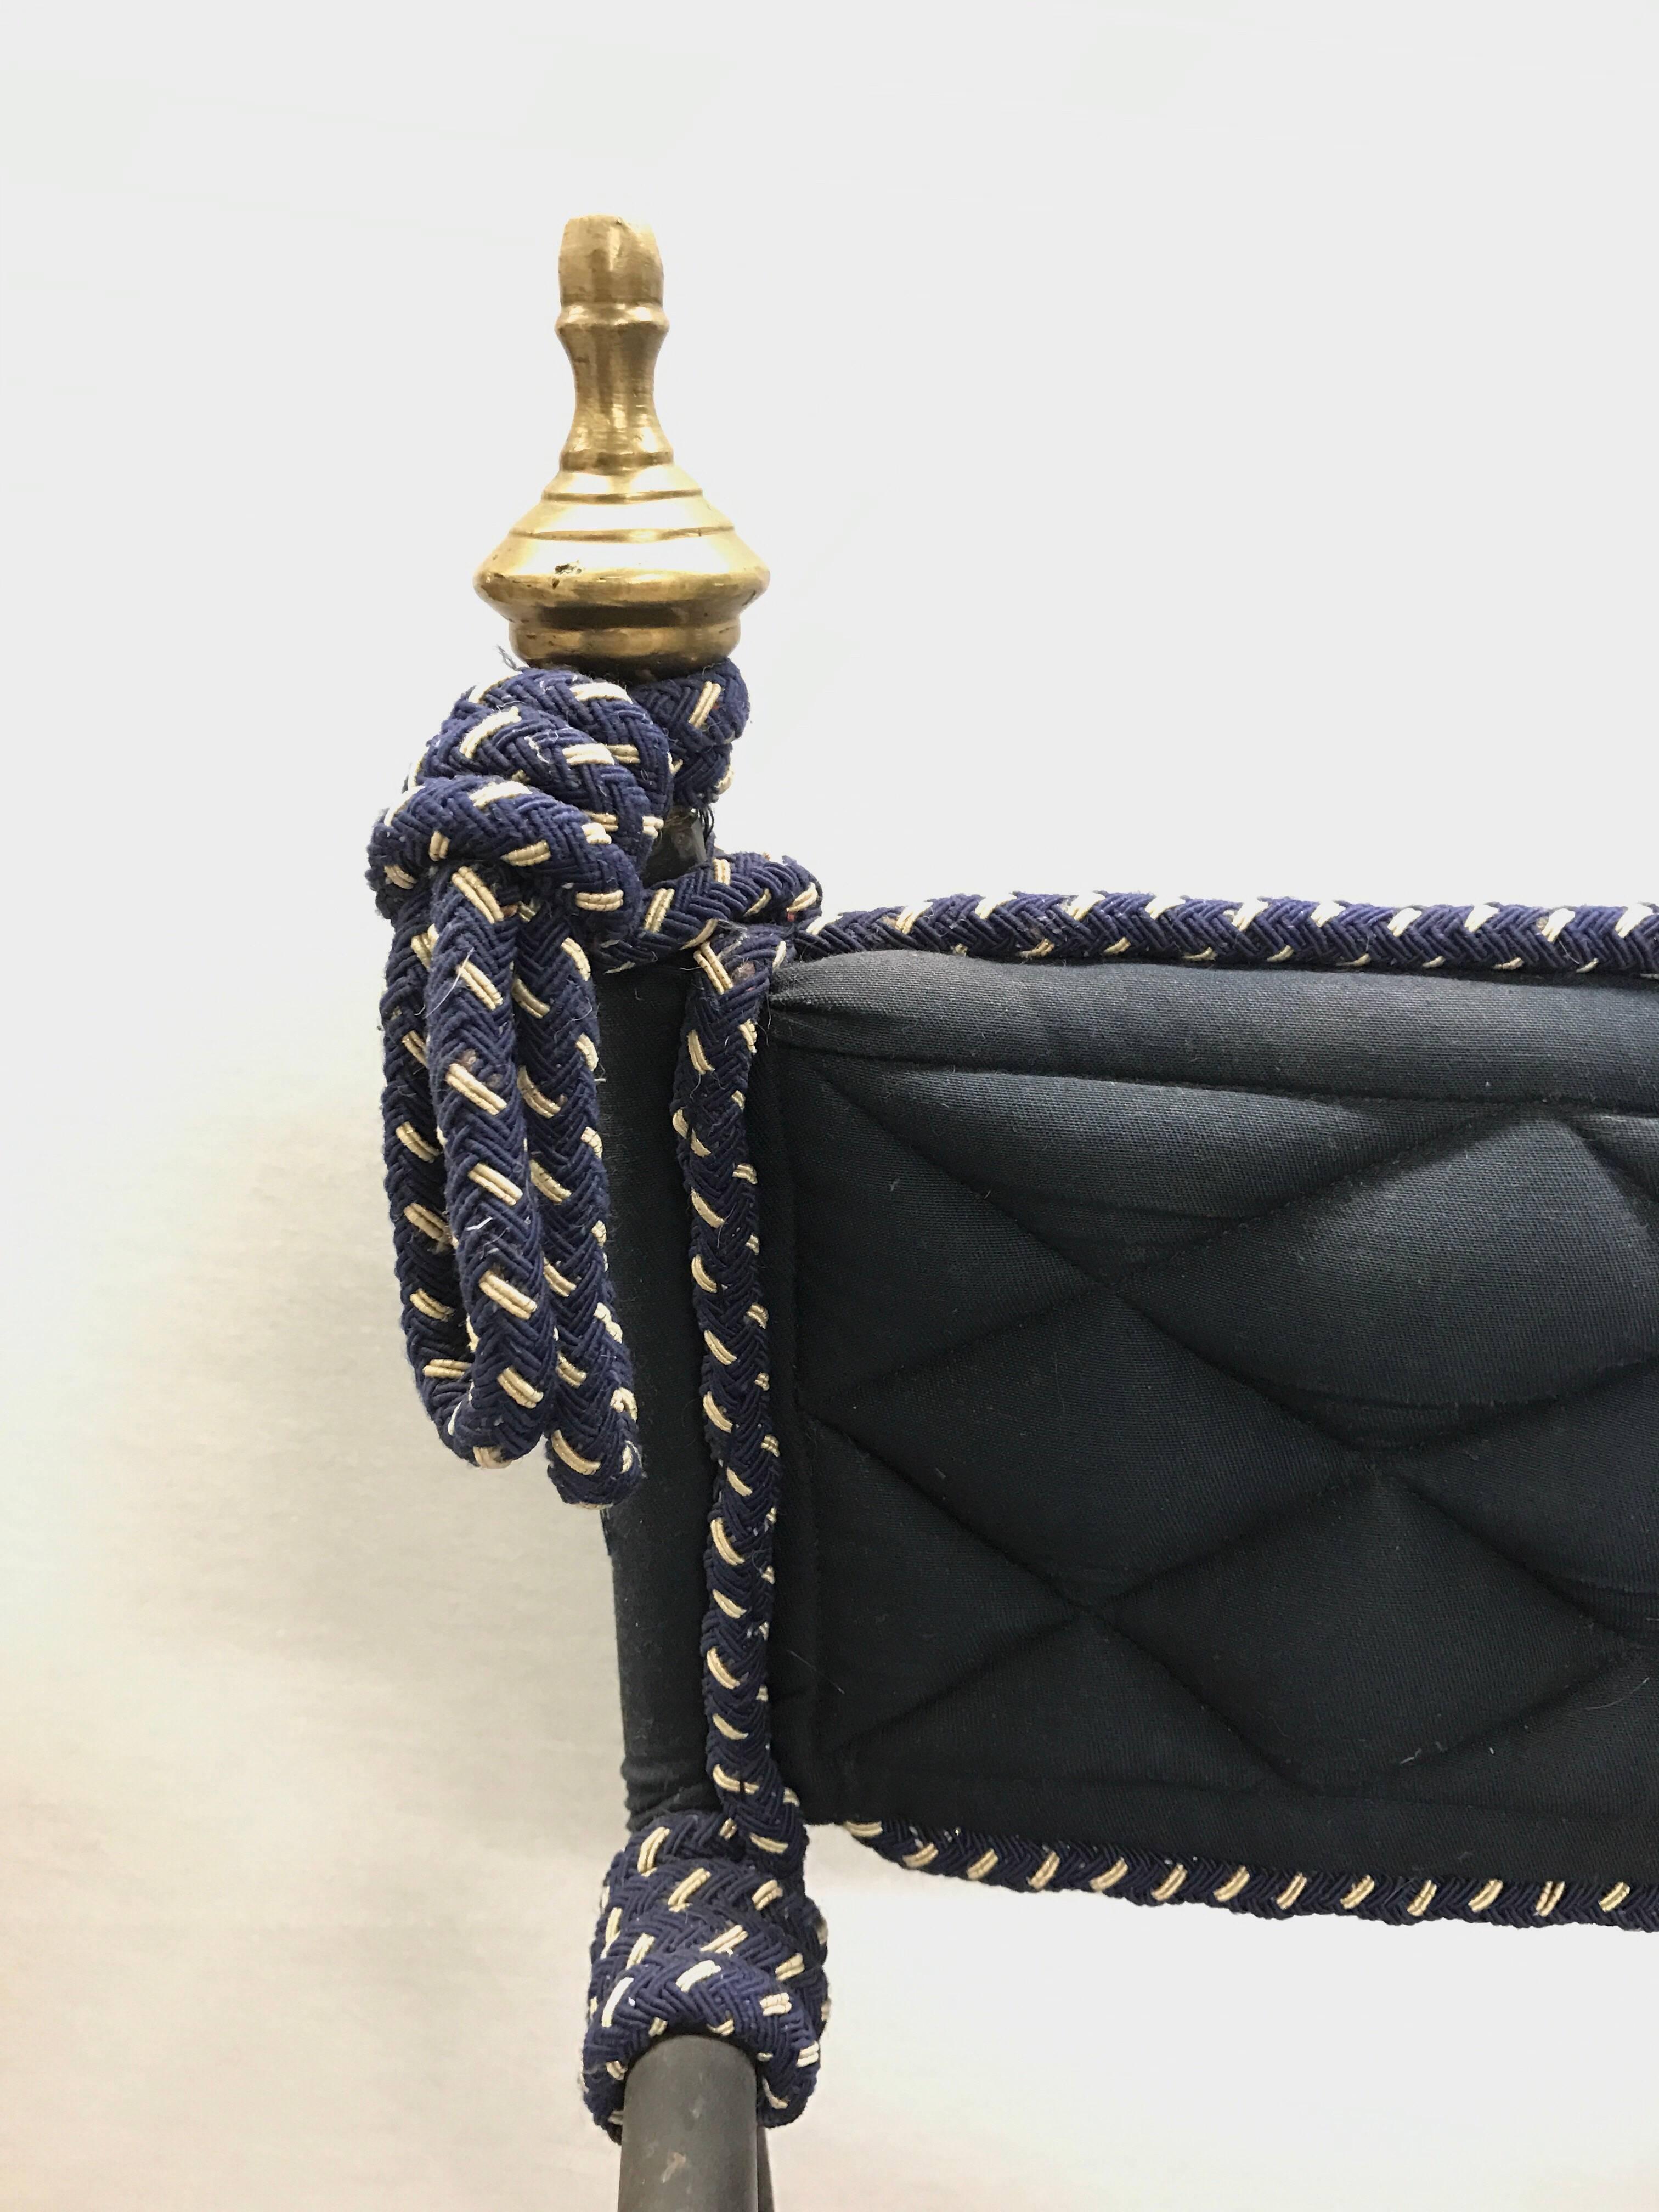 Italian Savonarola Campaign style folding chairs with wrought iron and brass finials. Rich navy upholstery with blue and white cording. Loose quilted cushion on seat.